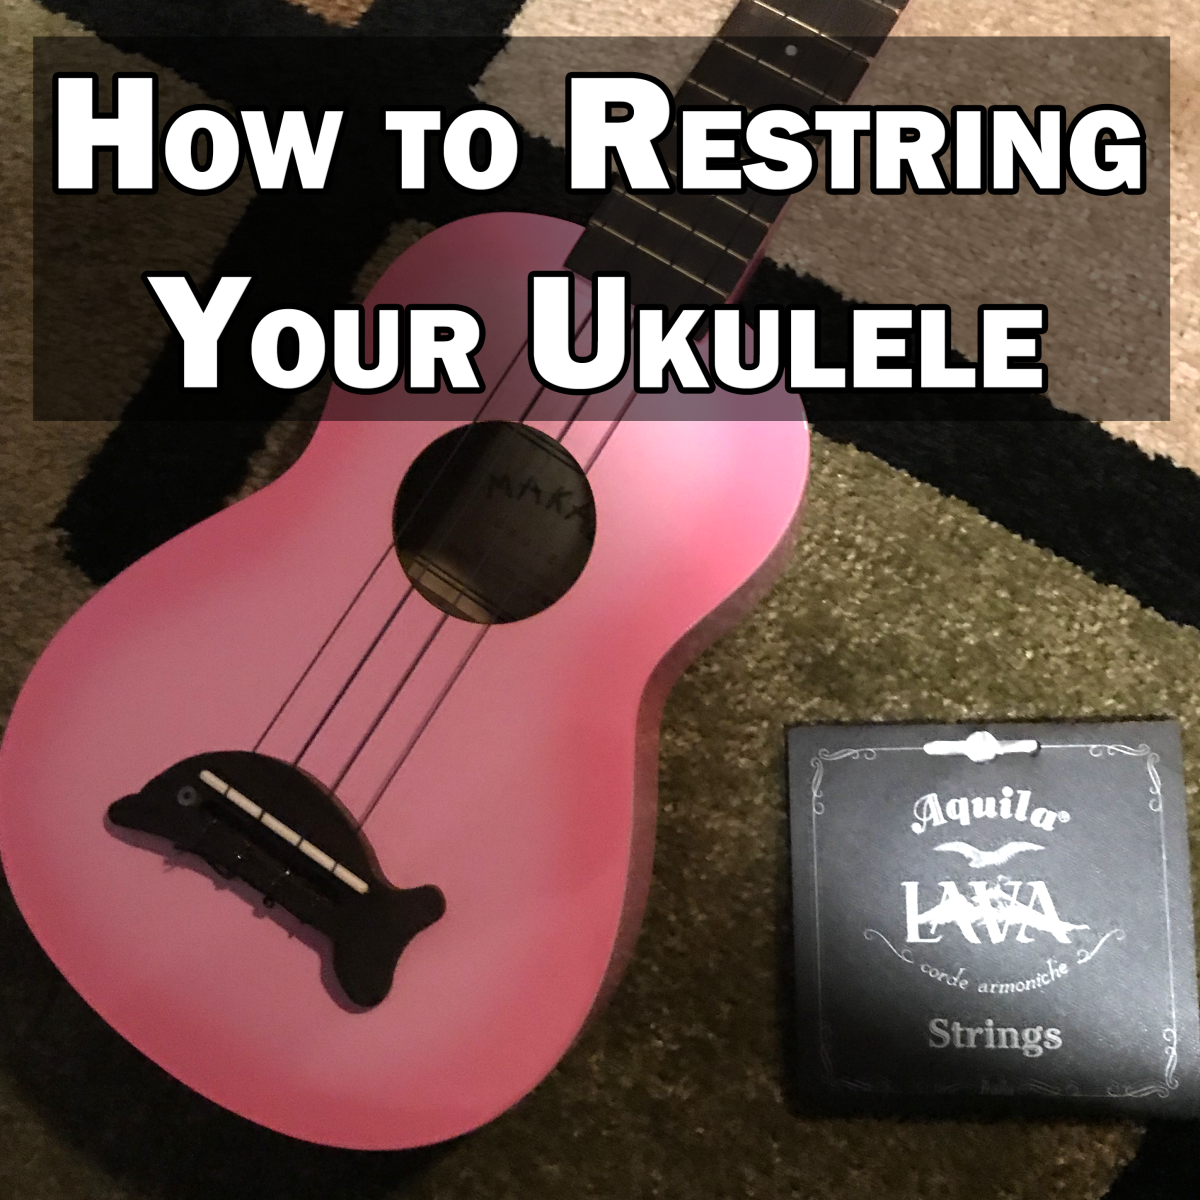 How to Change the Strings on Your Ukulele